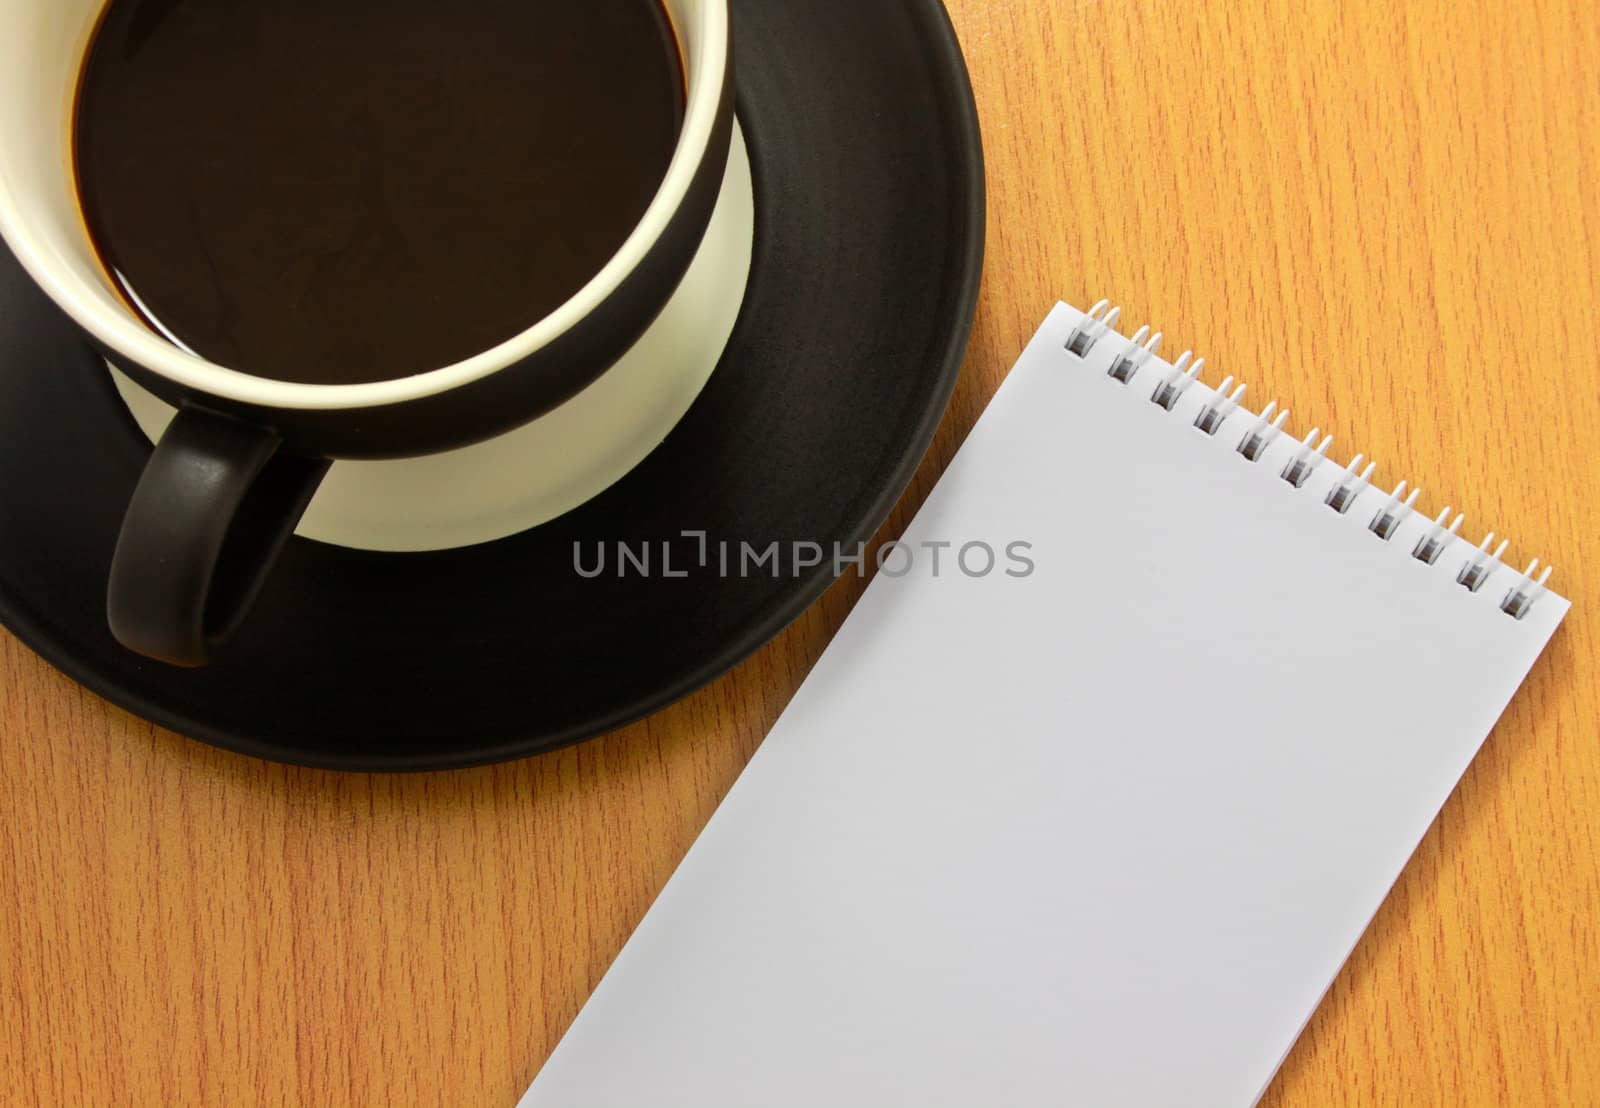 Coffee cup and white notebook